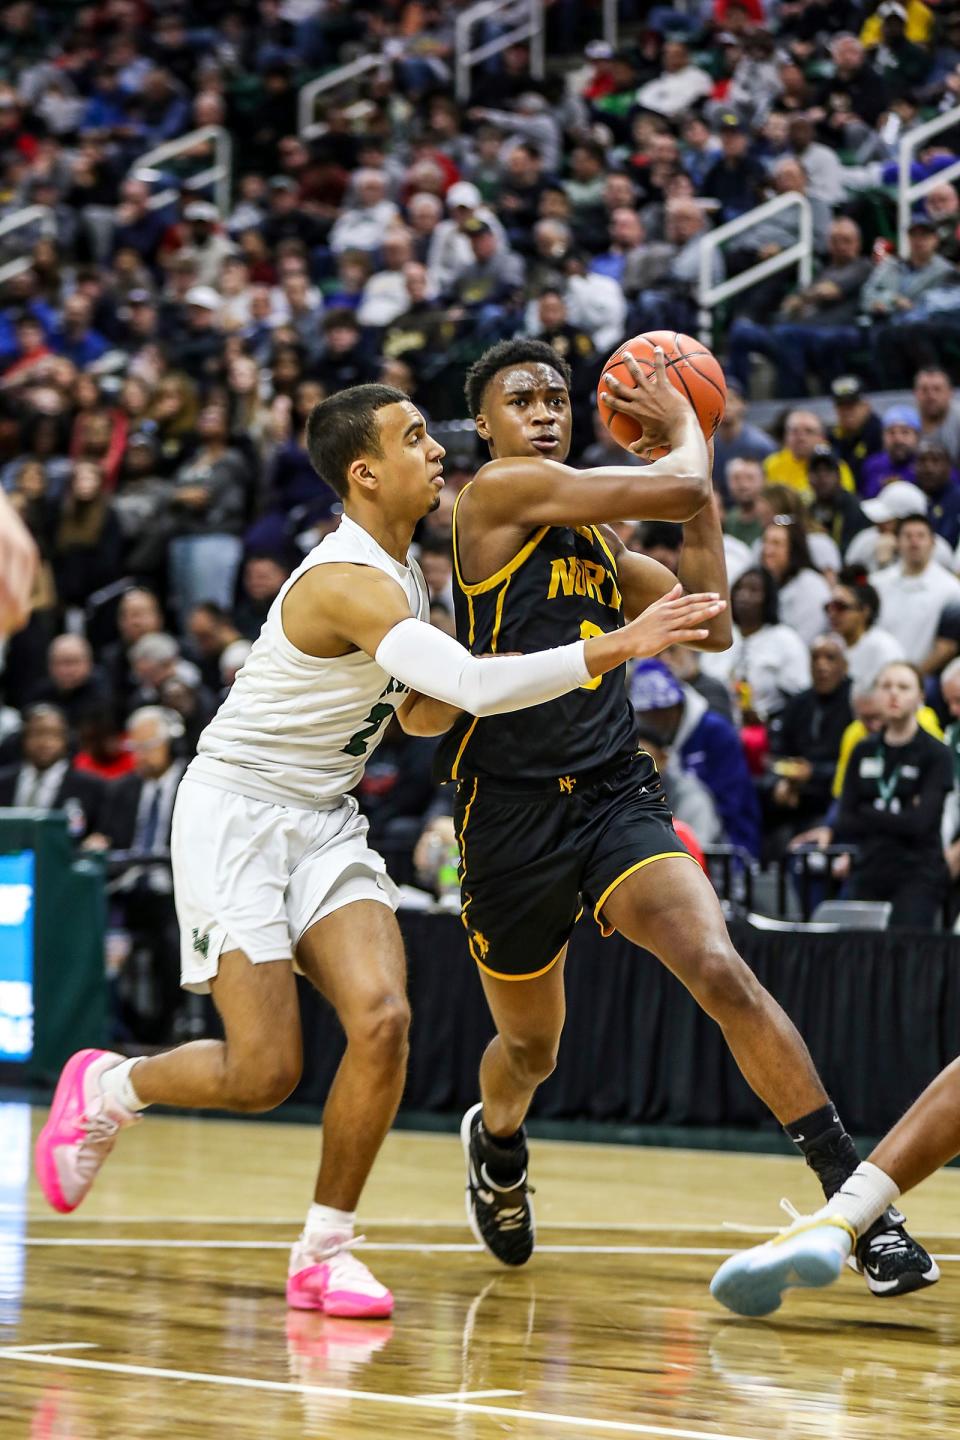 North Farmington’s Tyler Spratt drives the lane with the ball against Zeeland West’s Khi Anderson during North Farmington's 58-39 win in the MHSAA Division 1 boys basketball semifinals on Friday, March 15, 2024, at Breslin Center.